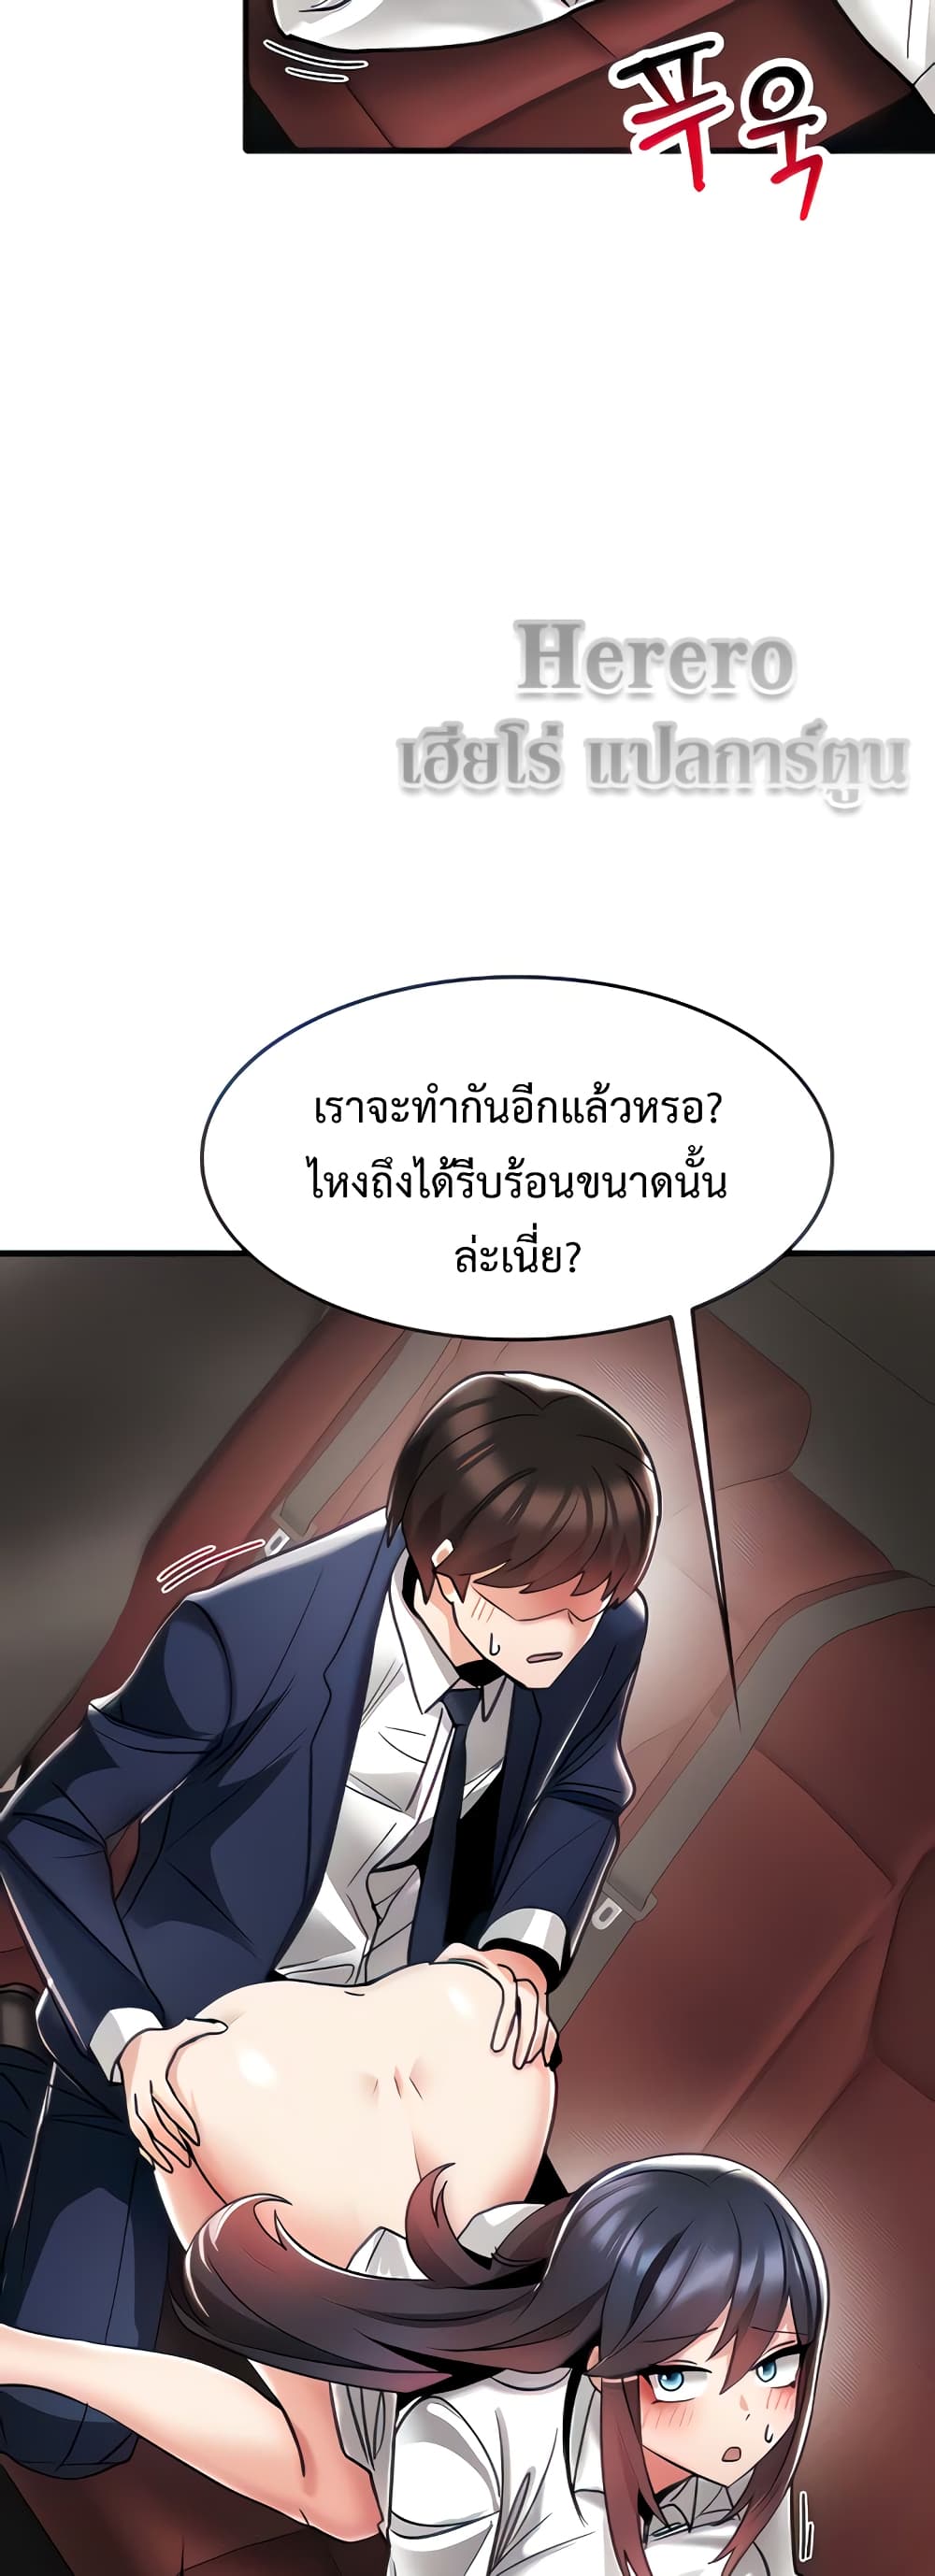 Relationship Reverse Button: Let’s Make Her Submissive 9 ภาพที่ 10